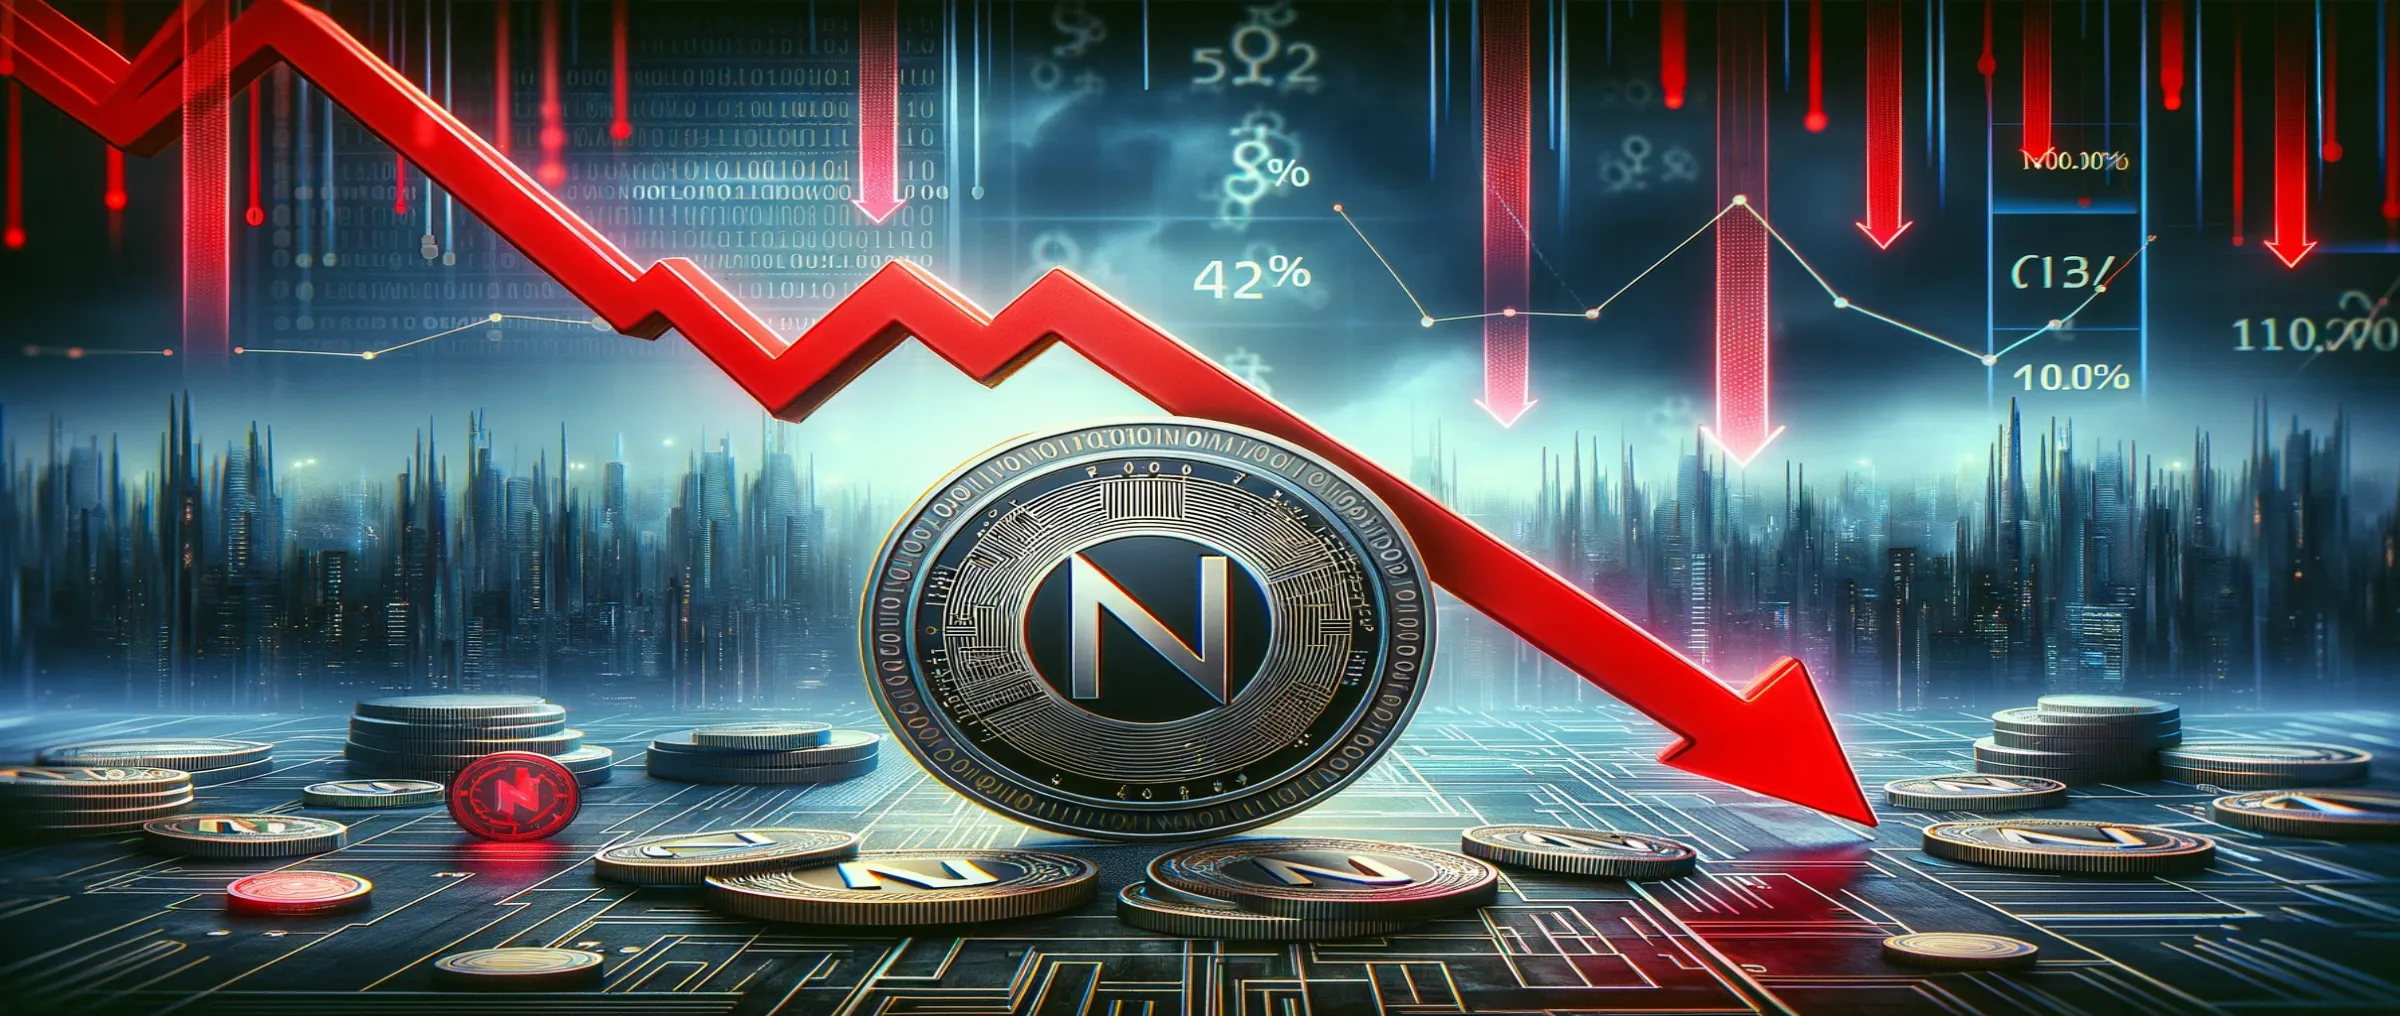 The cryptocurrency Notcoin dropped in value by 52 percent after the airdrop